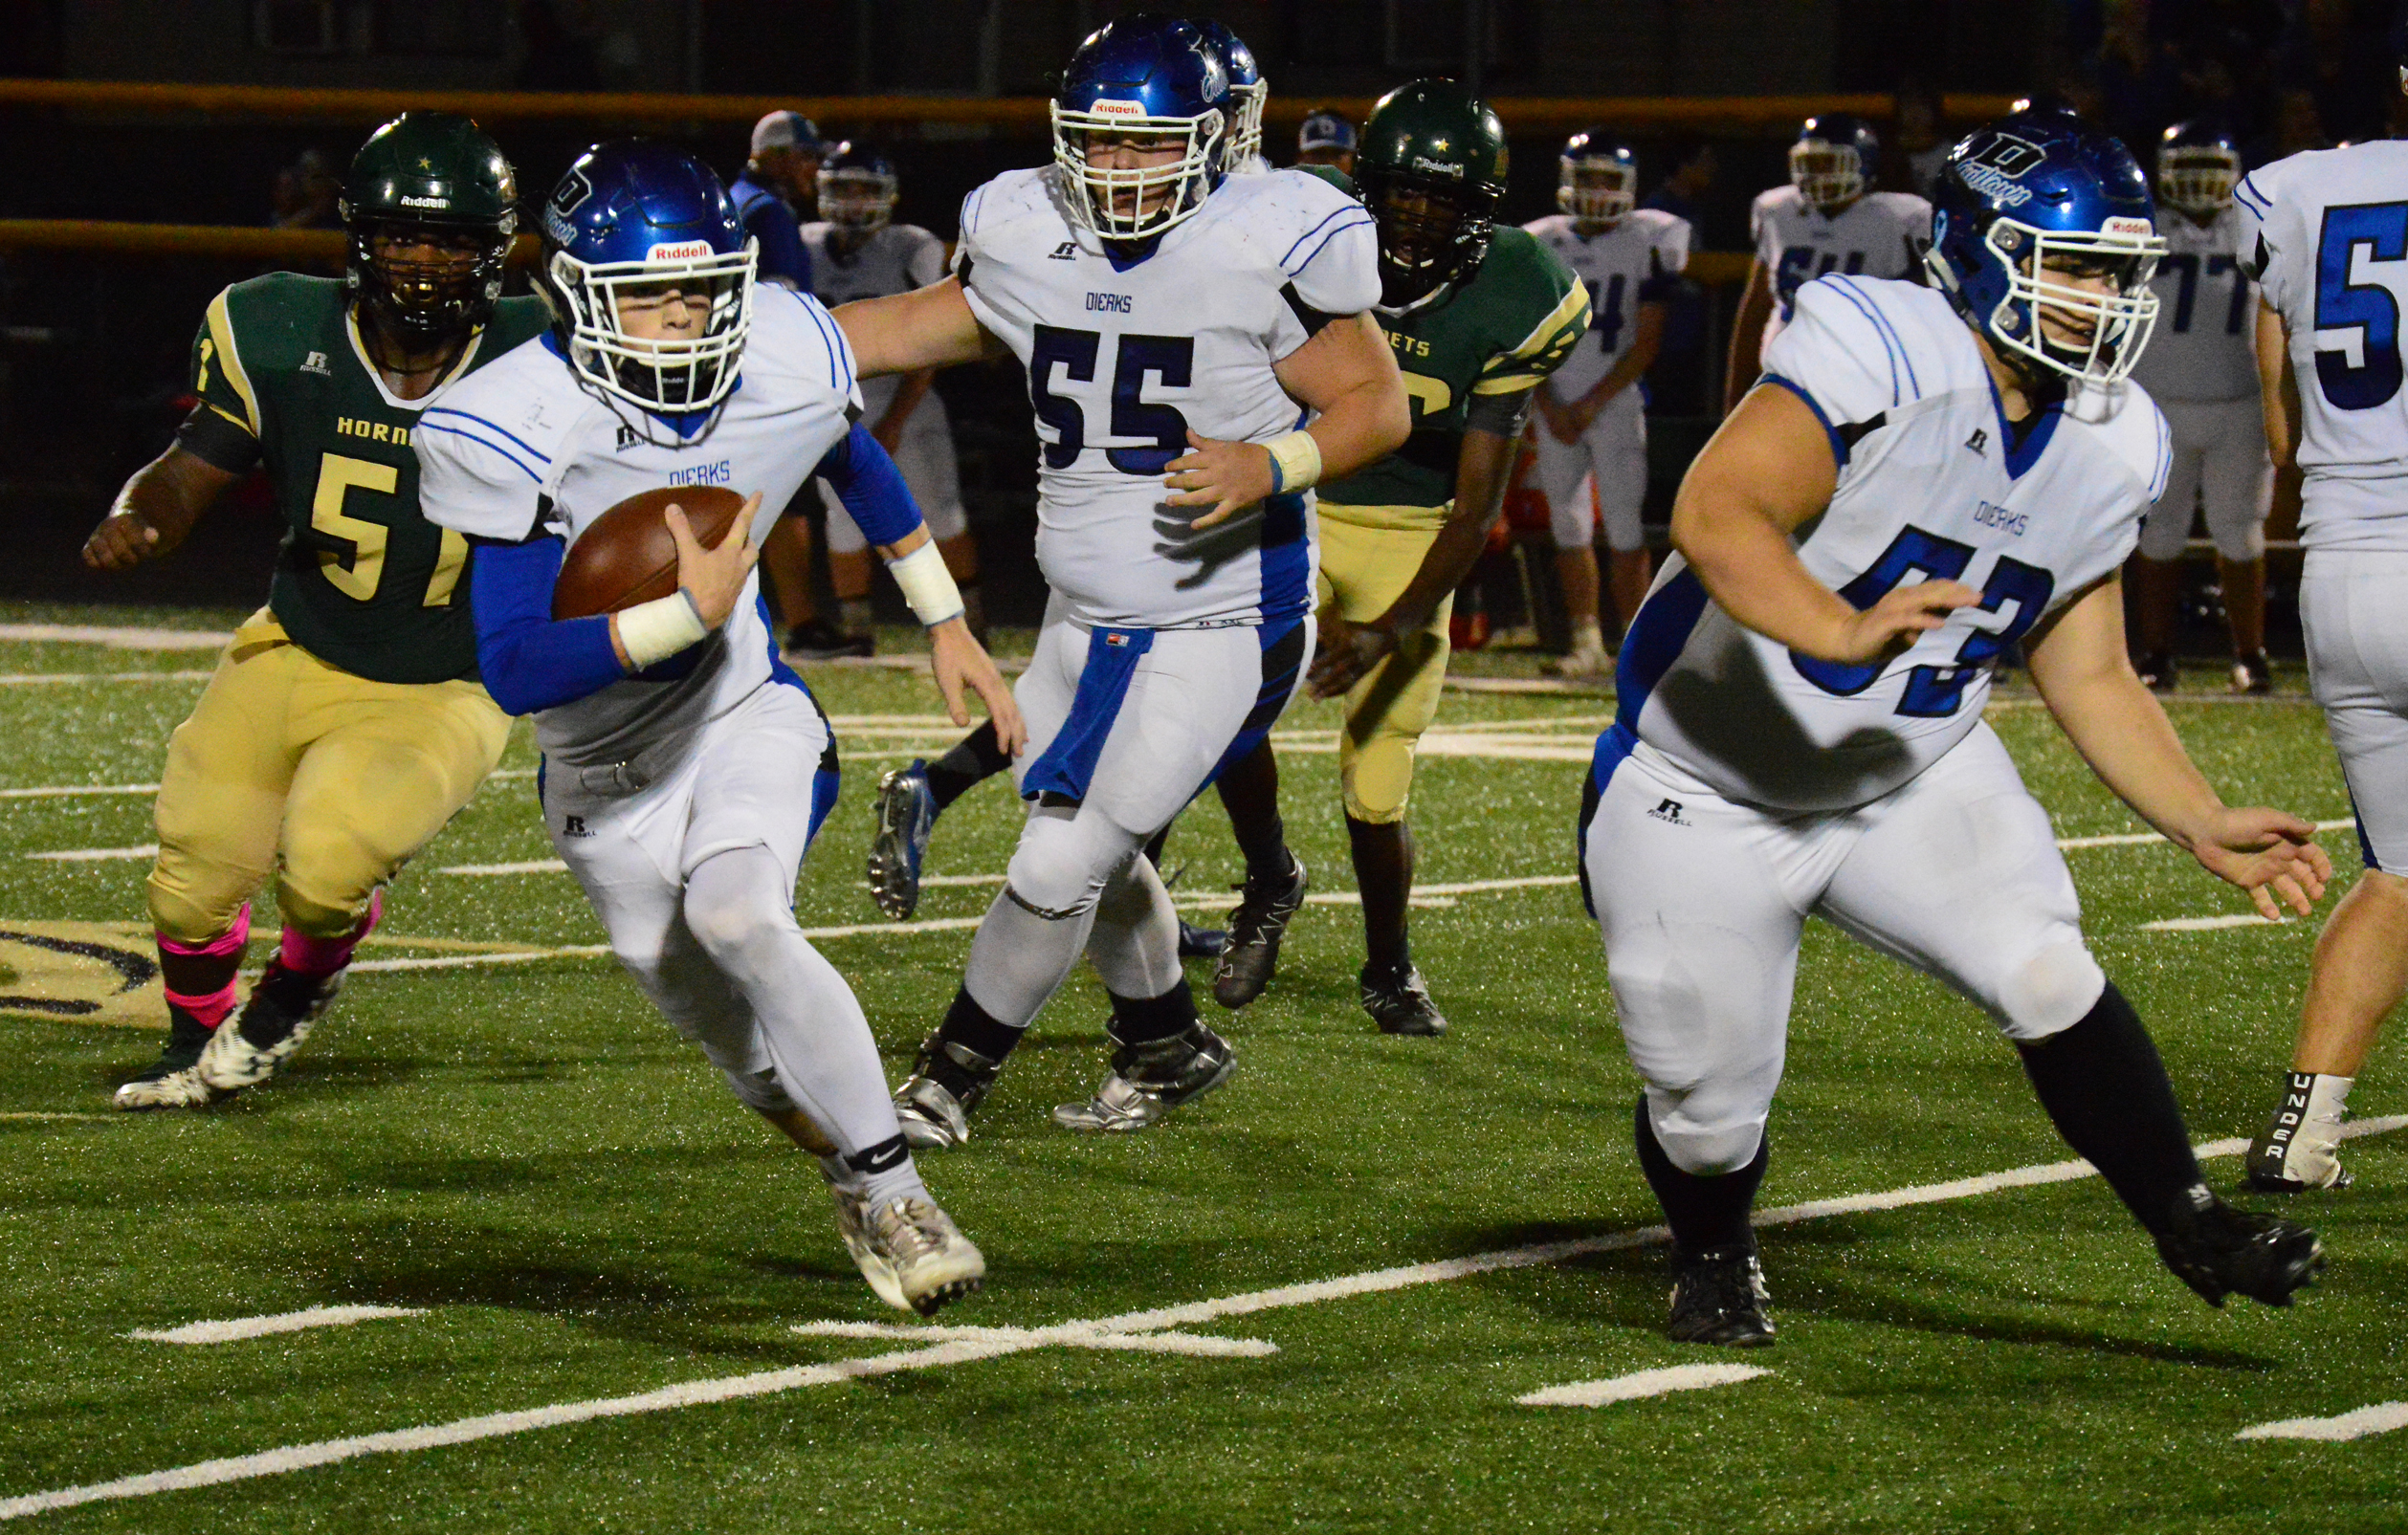 Dierks Outlaw senior Lane Woodruff carries the ball Friday night at Mineral Springs with an assist from Jeff Kompkoff (53). Woodruff accounted for 392 yards of the Outlaws' 650 total yards of offense.